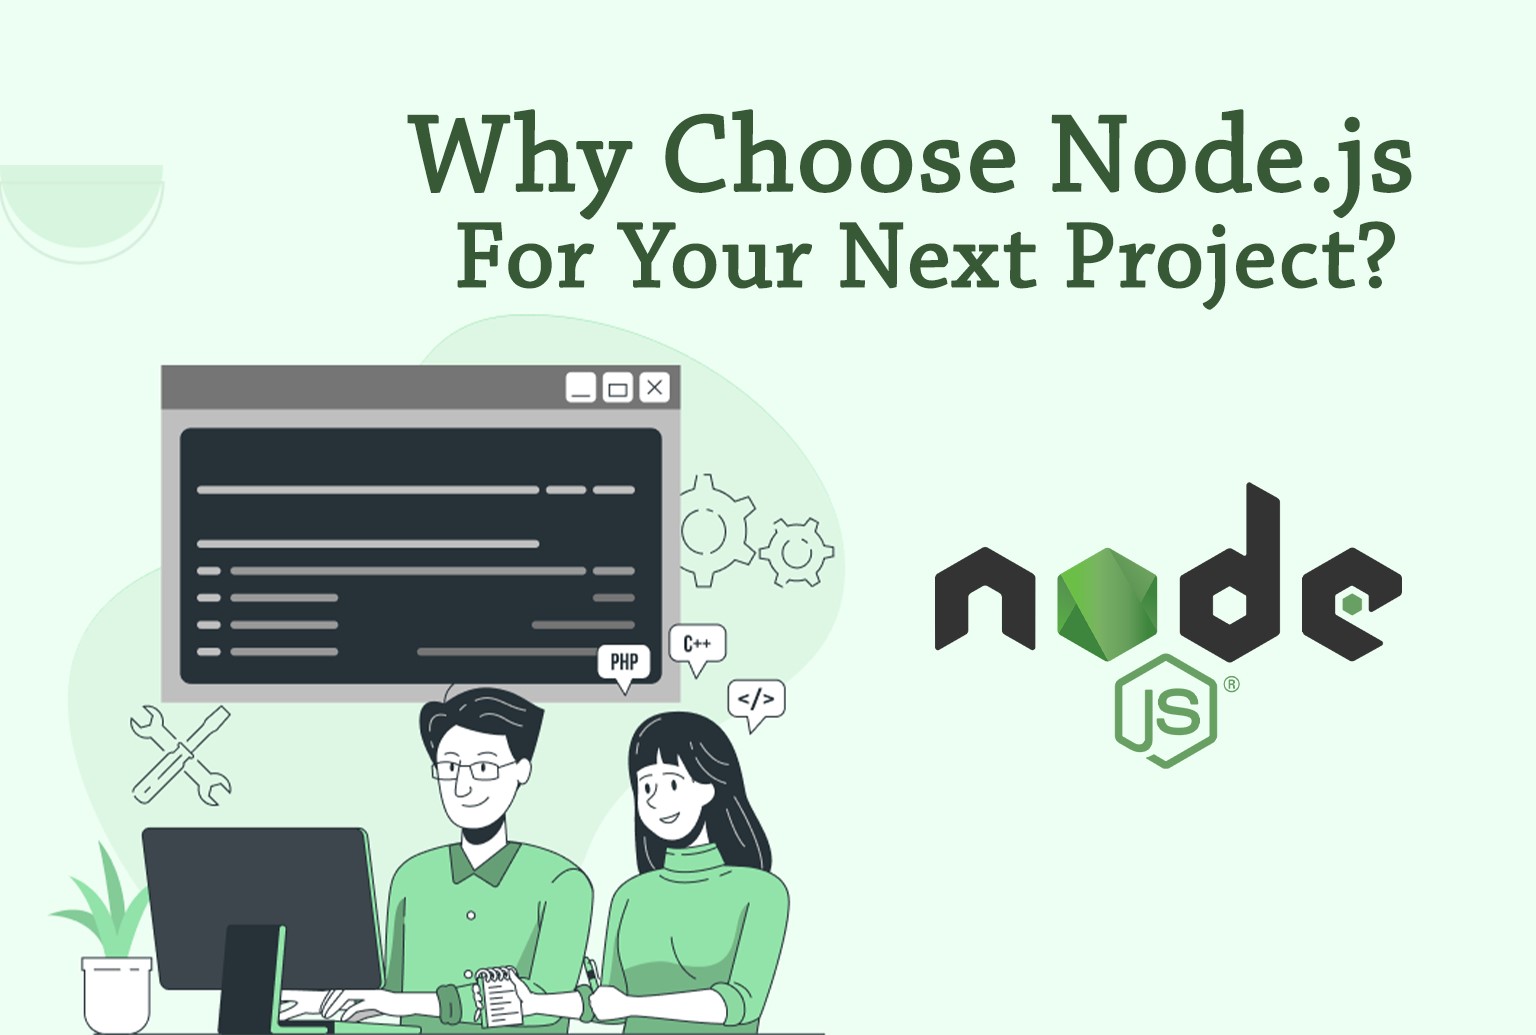 Why Choose Node.js for your next project